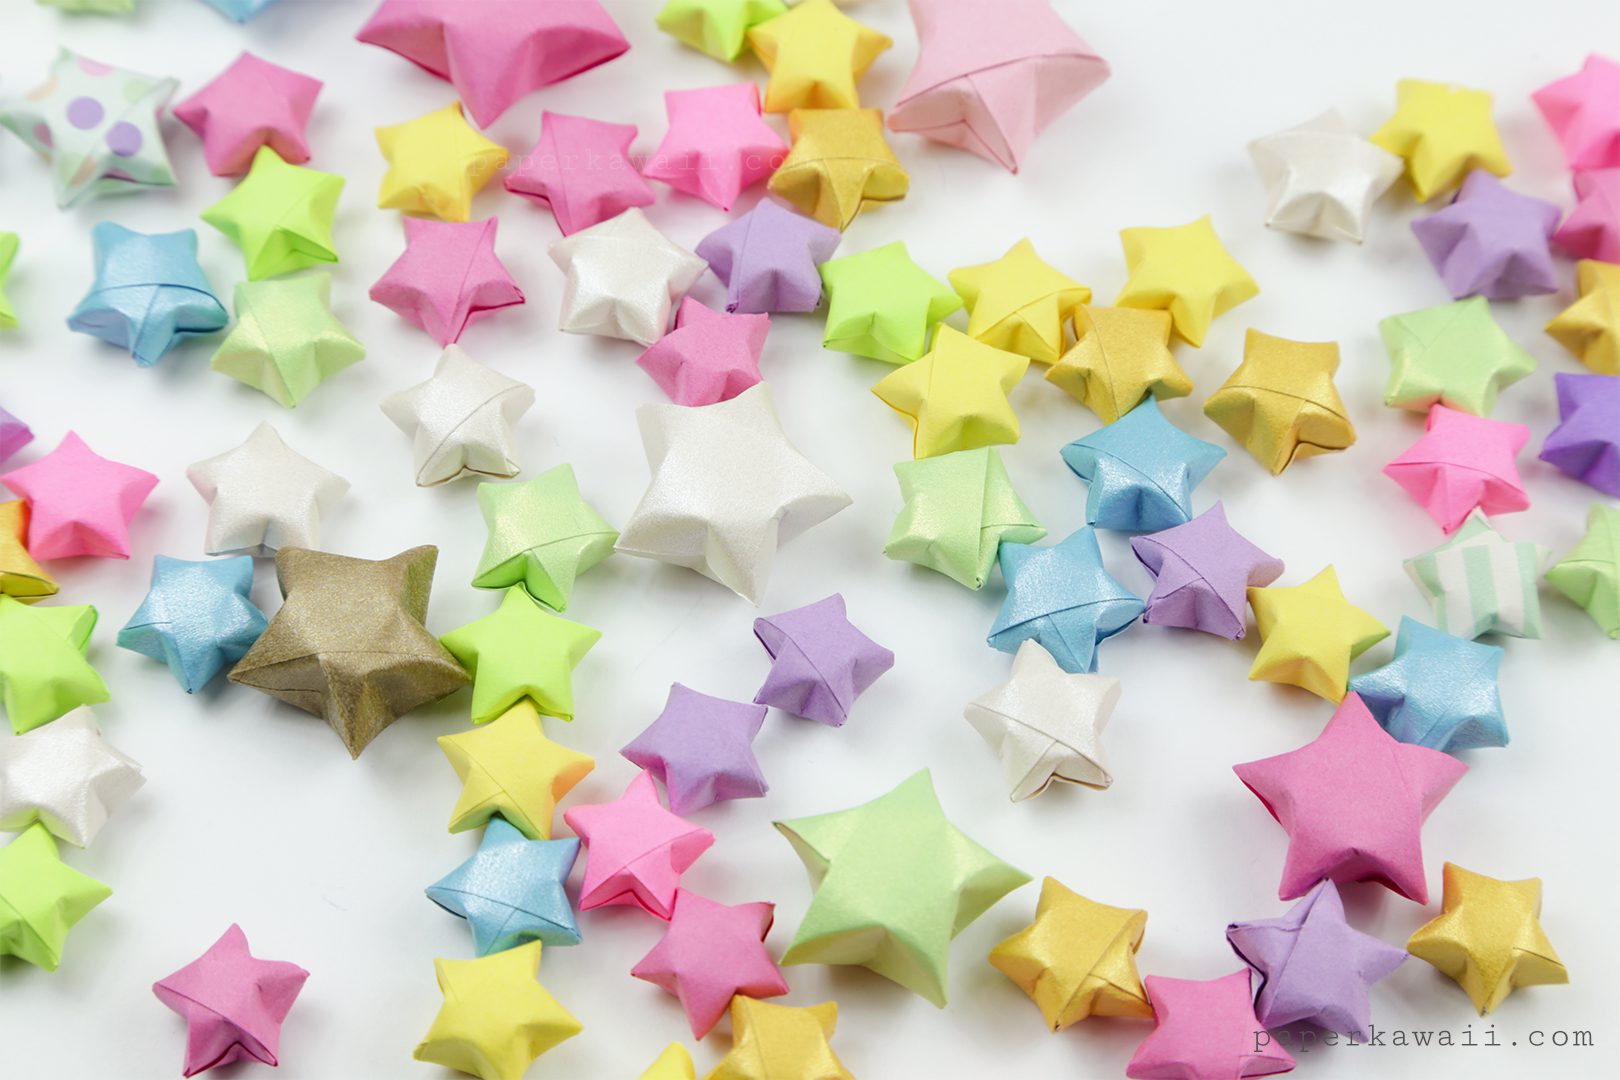 How to Make Origami Lucky Star - How to Make Easy Origami